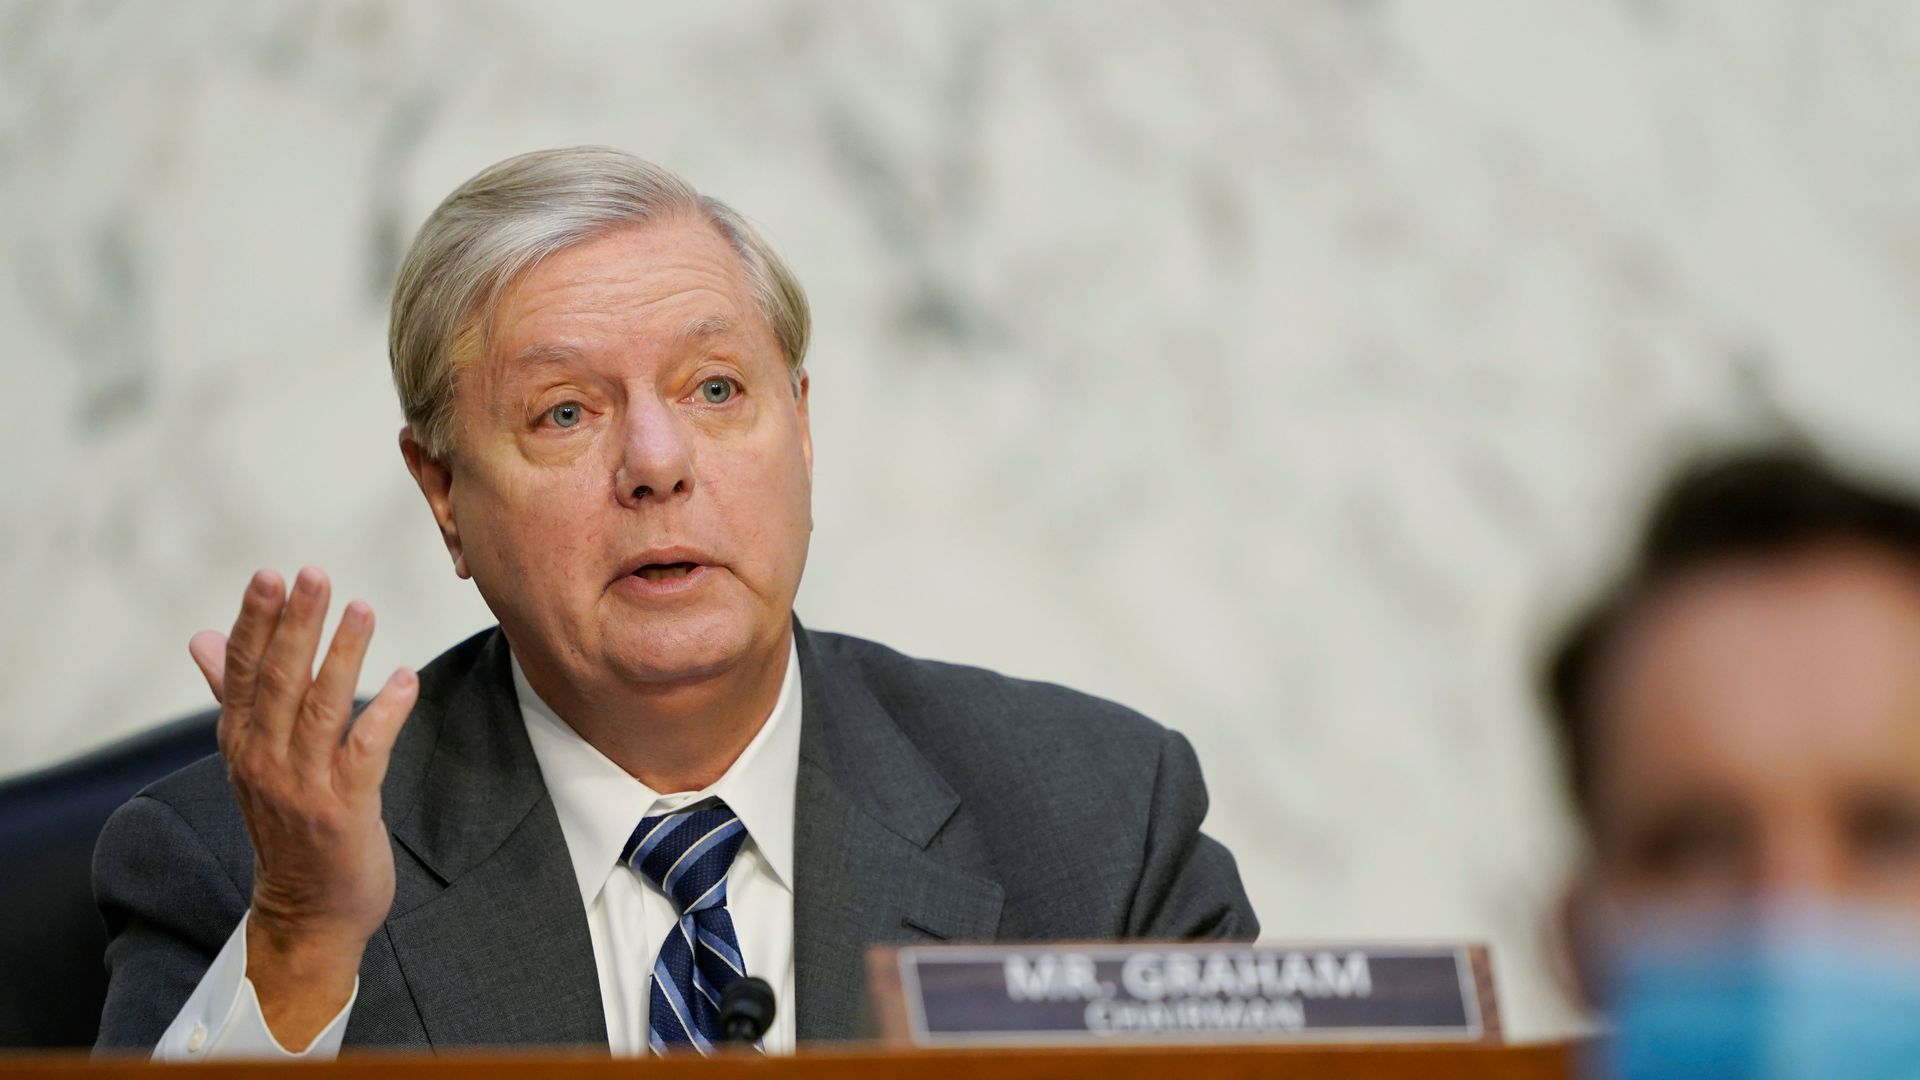 Sen. Lindsey Graham speaking during the Senate Judiciary Committee confirmation hearings for Supreme Court nominee Judge Amy Coney Barrett.